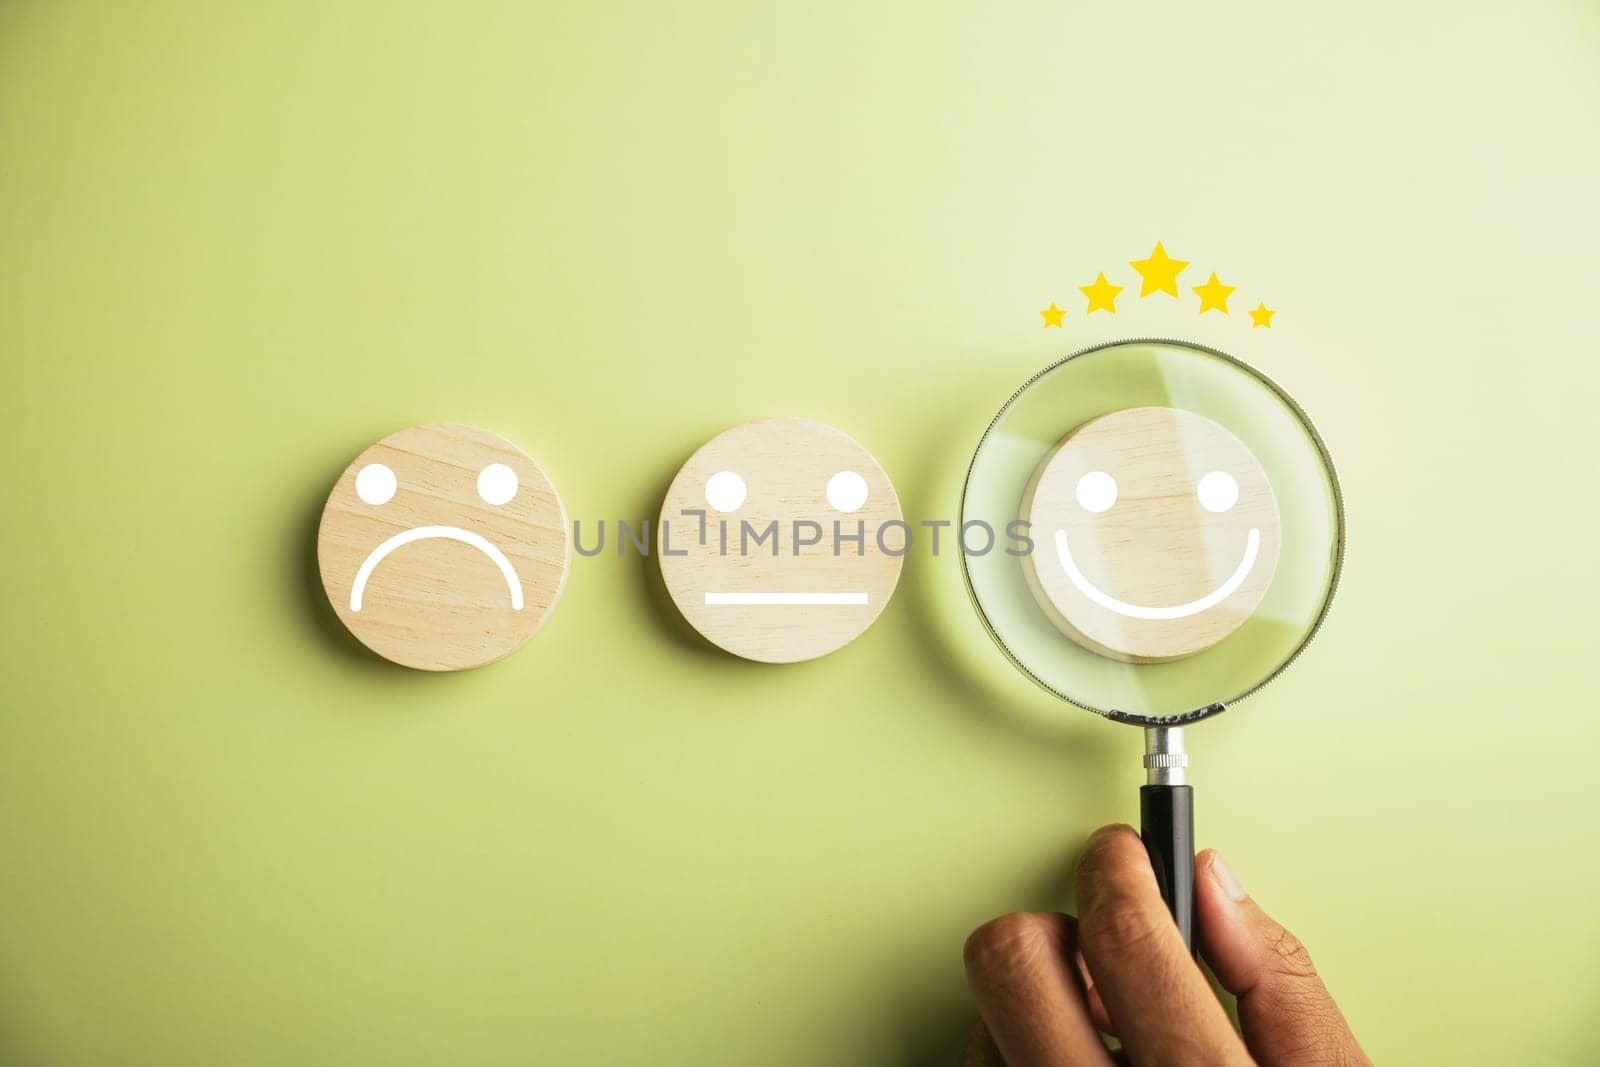 Hand holds magnifier, focusing on selected happy smiley face icon among various emotions. Good feedback rating and positive customer review. Experience, satisfaction survey, mental health.